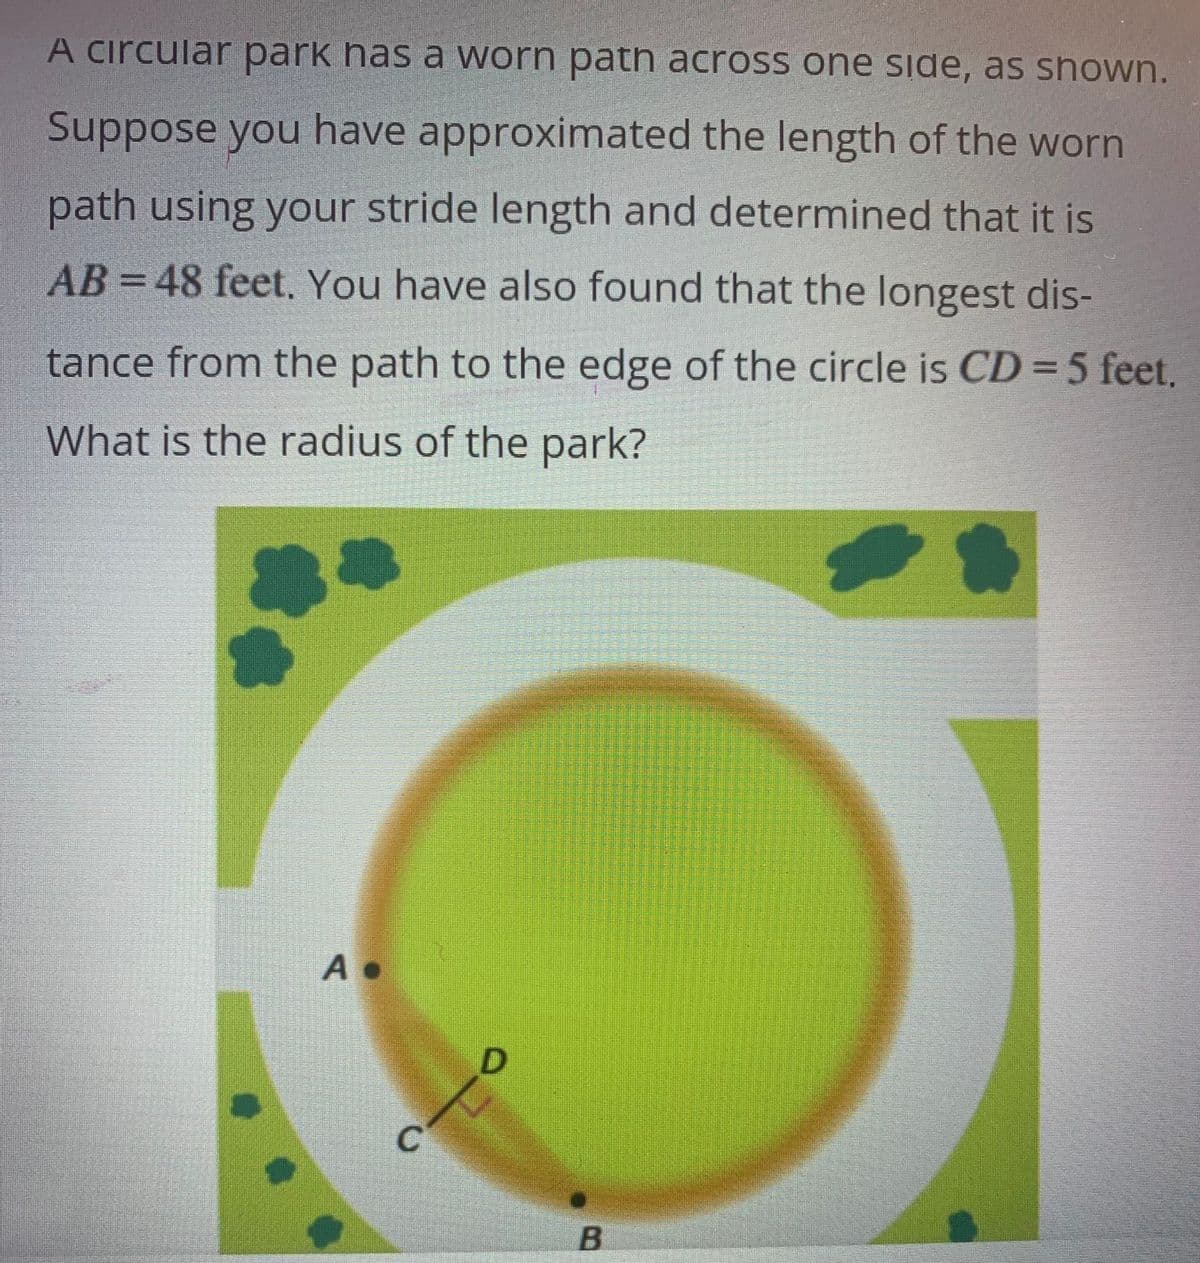 A circular park has a worn path across one side, as shown.
Suppose you have approximated the length of the worn
path using your stride length and determined that it is
AB = 48 feet. You have also found that the longest dis-
tance from the path to the edge of the circle is CD = 5 feet.
What is the radius of the park?
A.
C
D
B